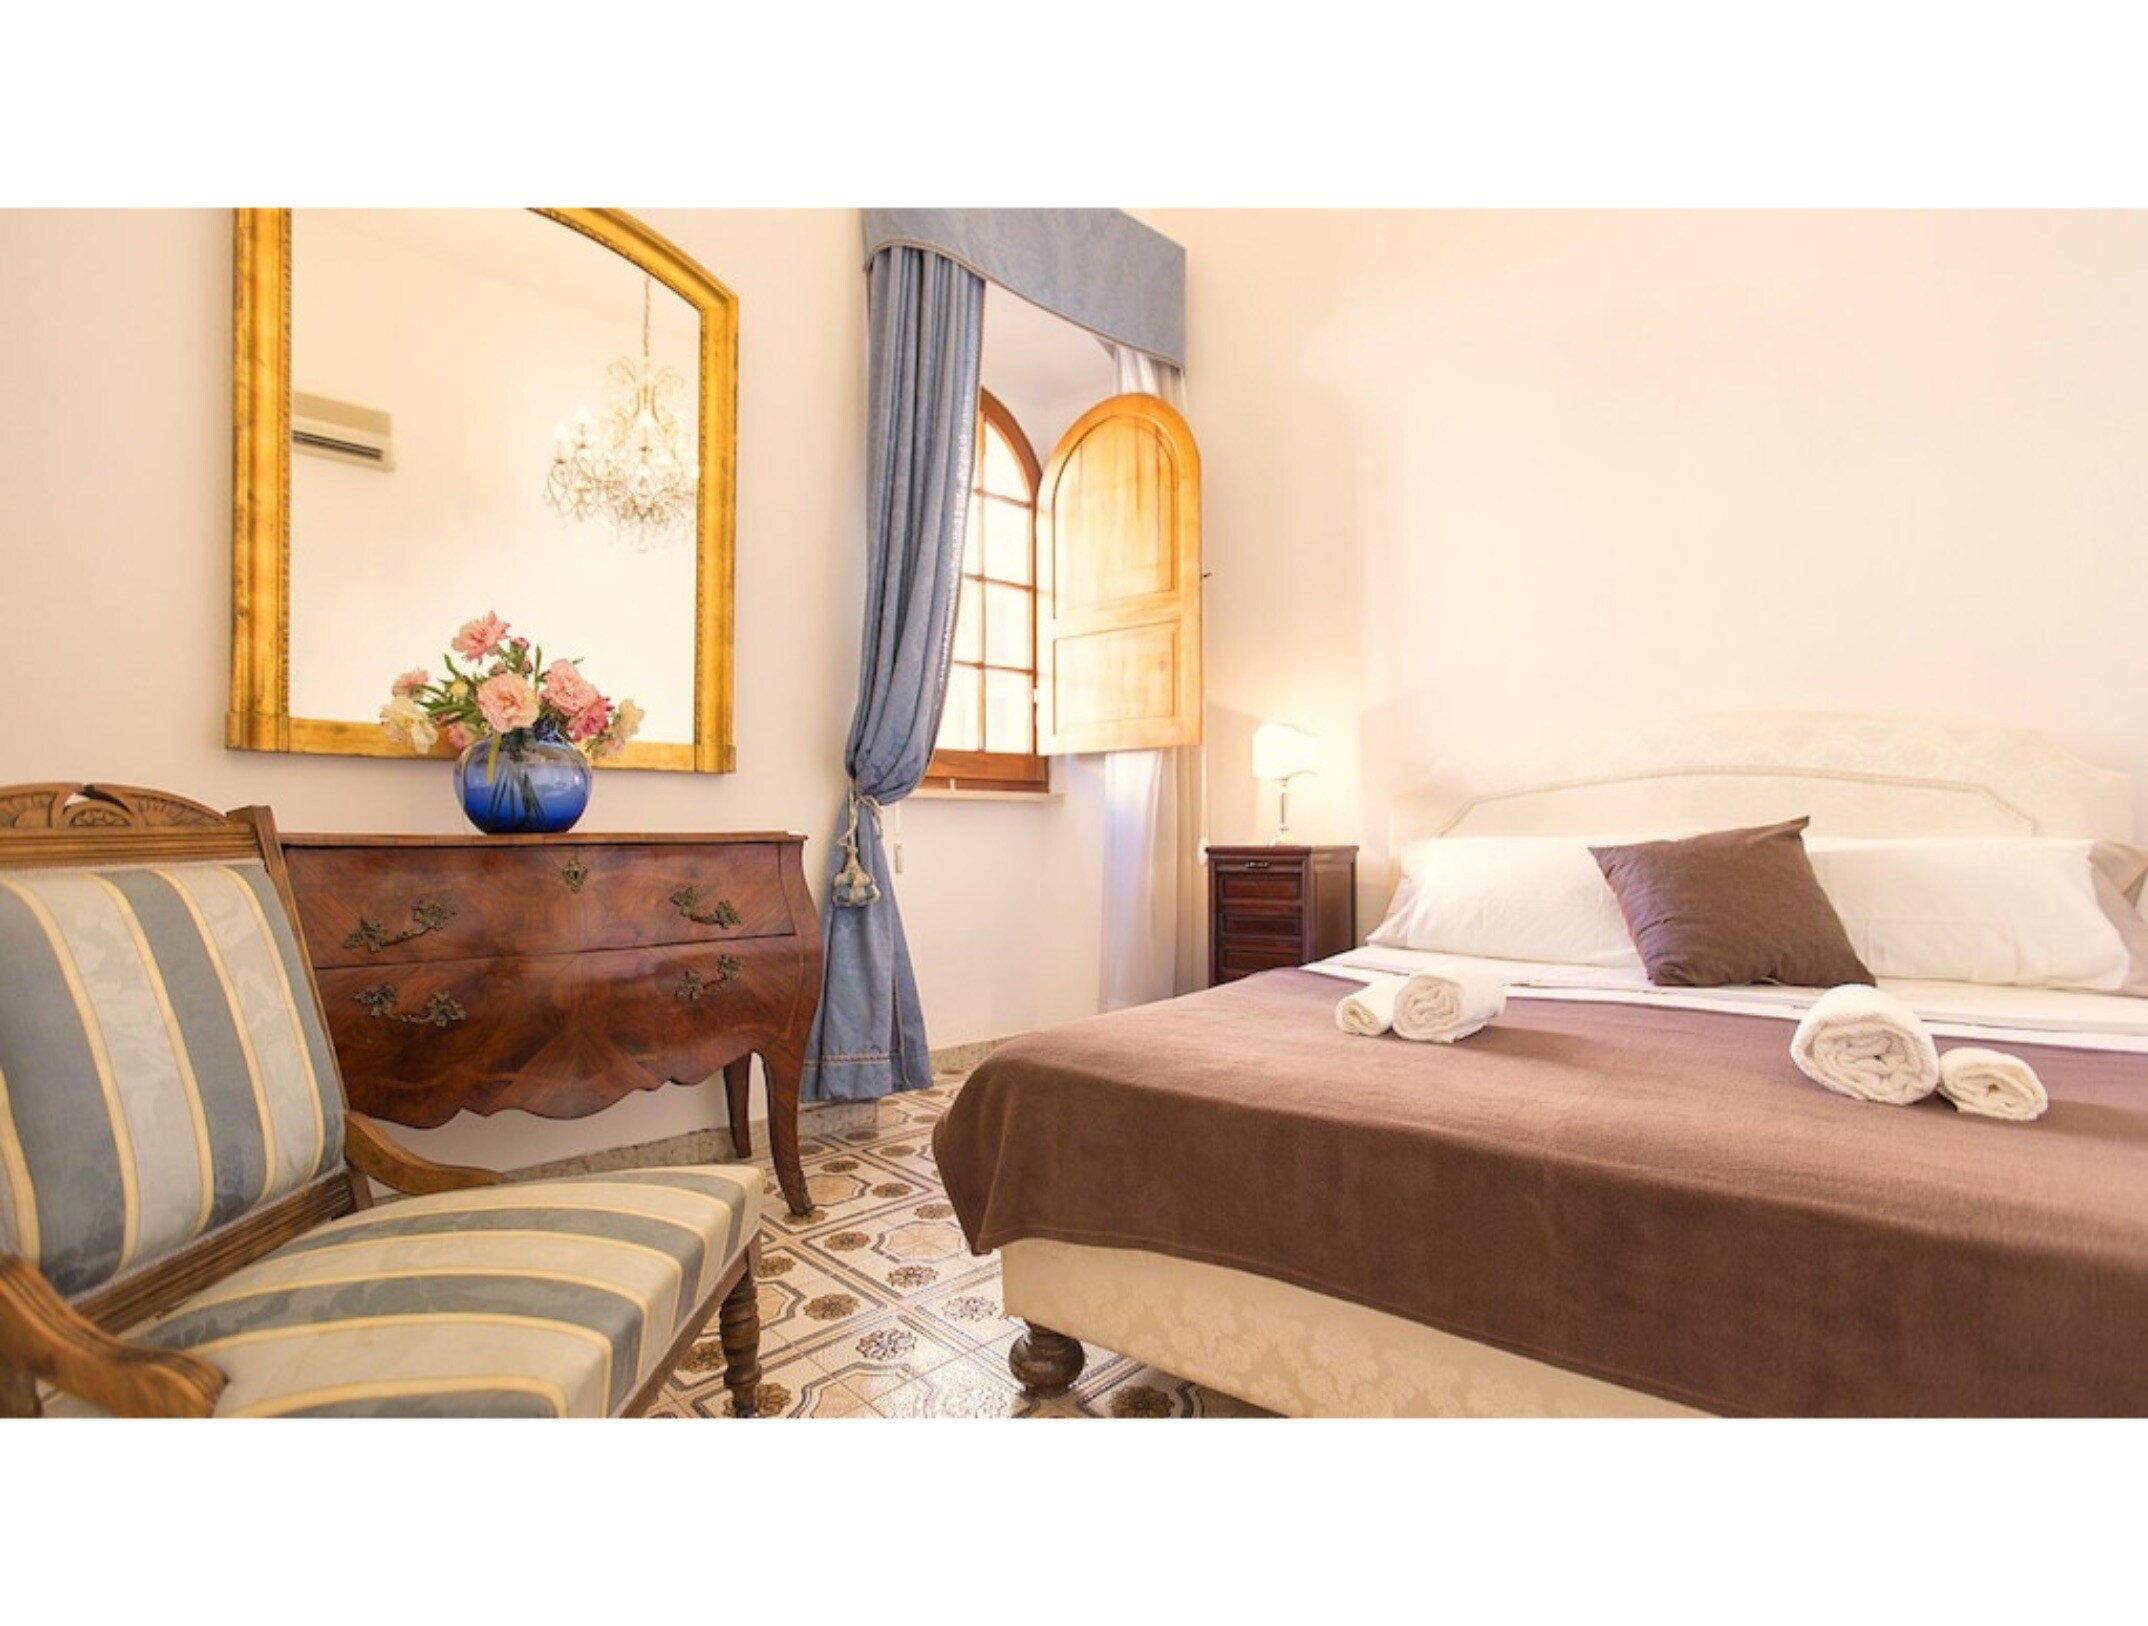 Property Image 2 - Alghero, Palazzo D’albis in the center for 8 people